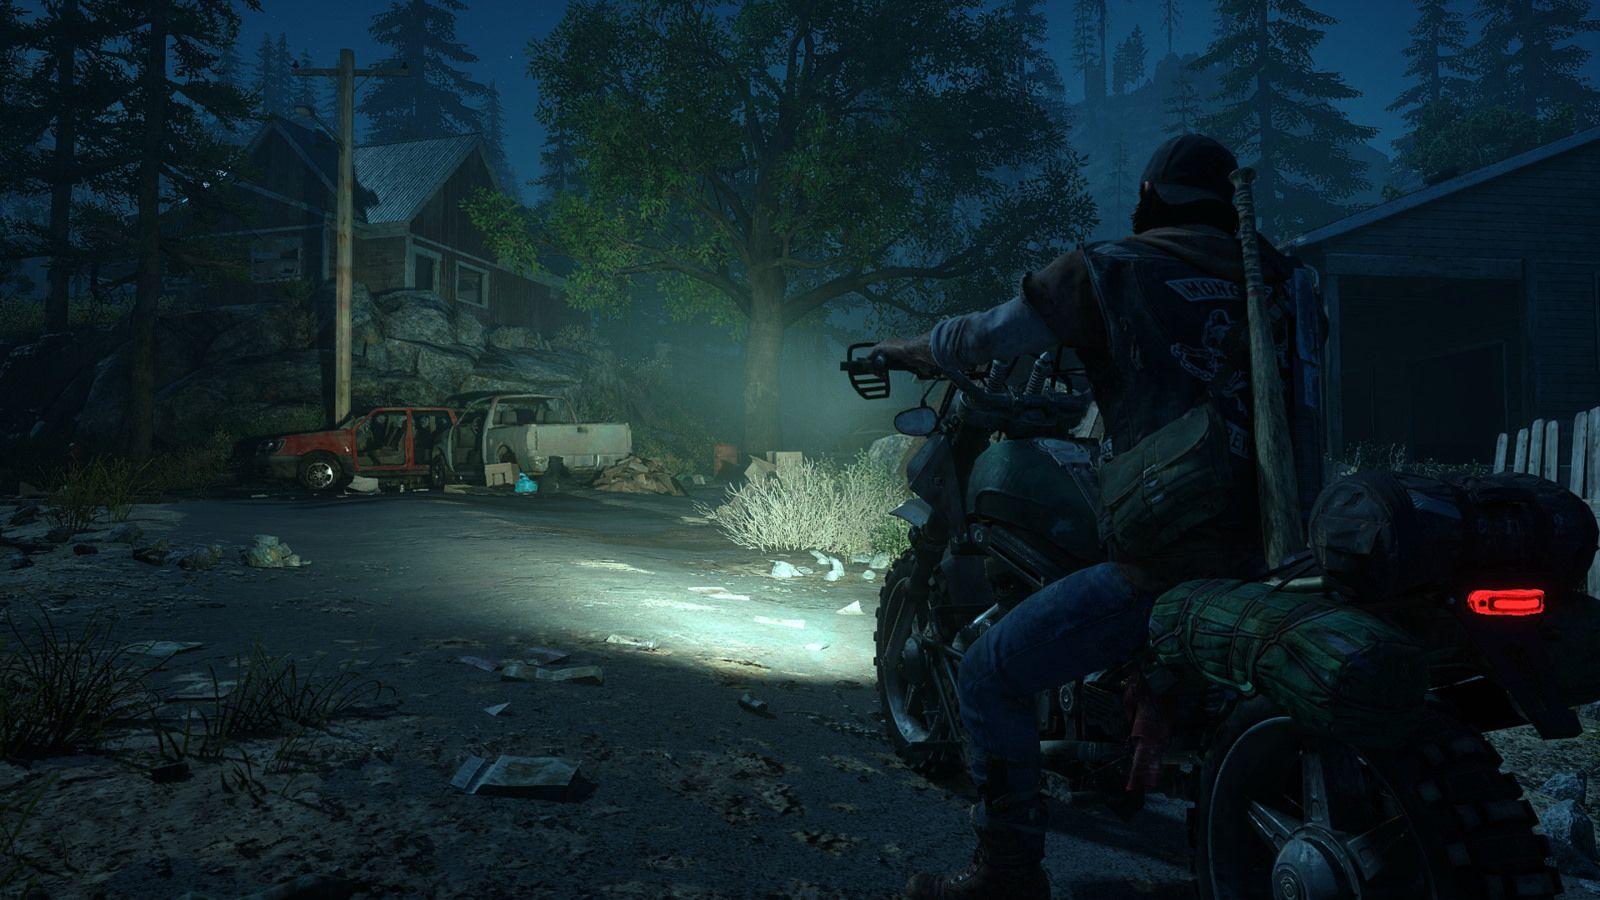 Days Gone: PS4 and PS4 Pro Exclusive Game